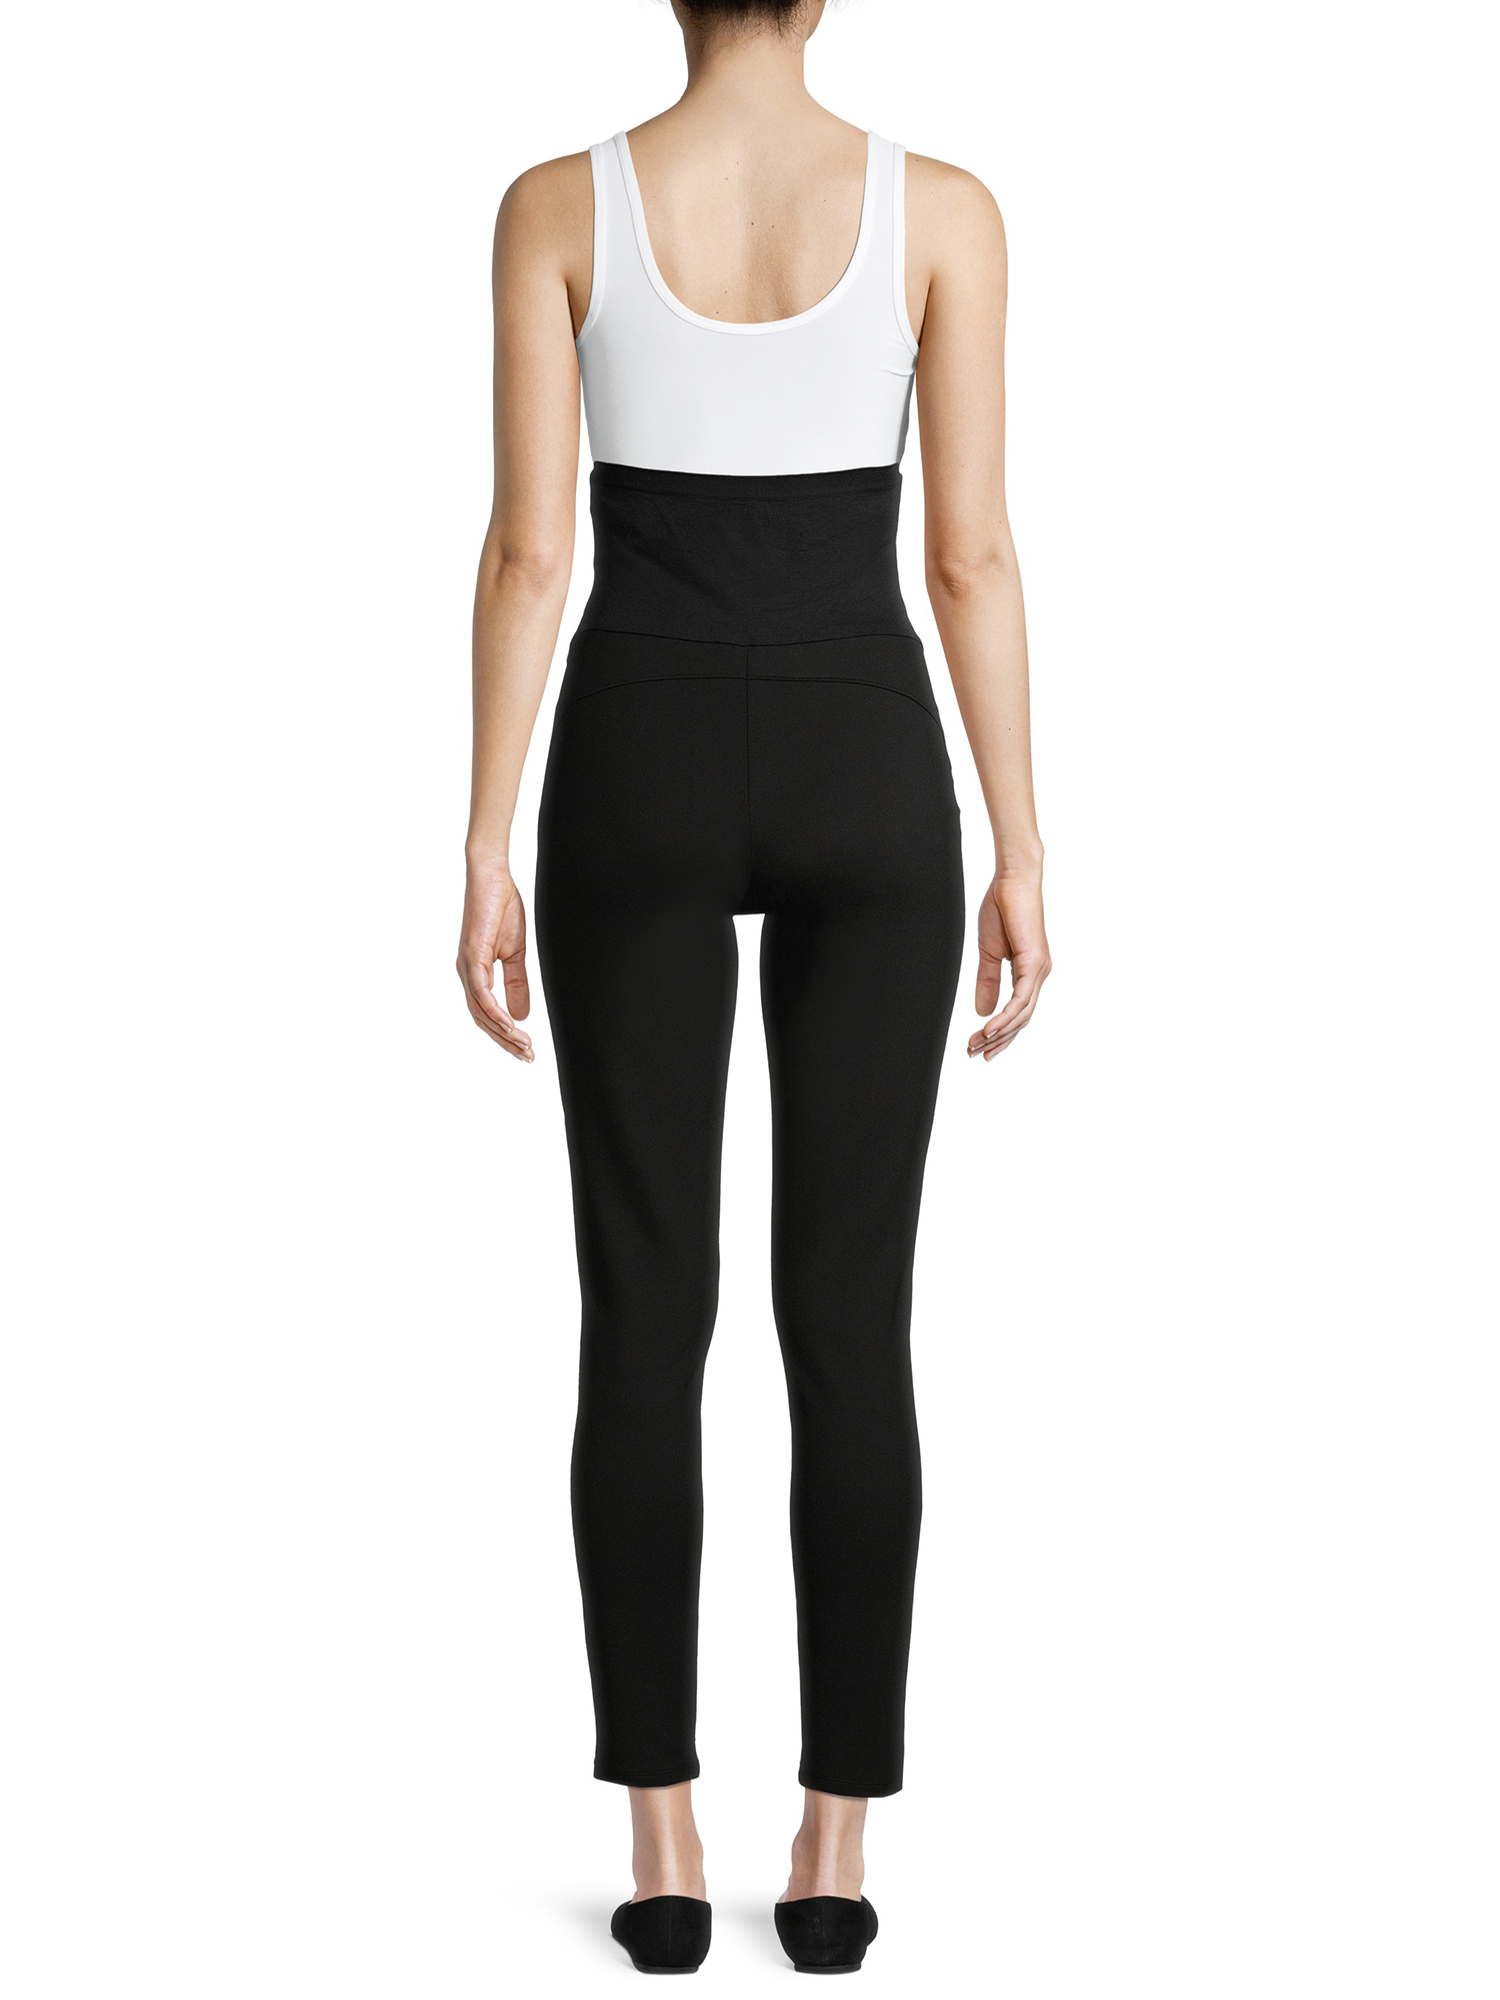 Time and Tru Maternity Ponte Knit Leggings with Full Panel - image 3 of 6